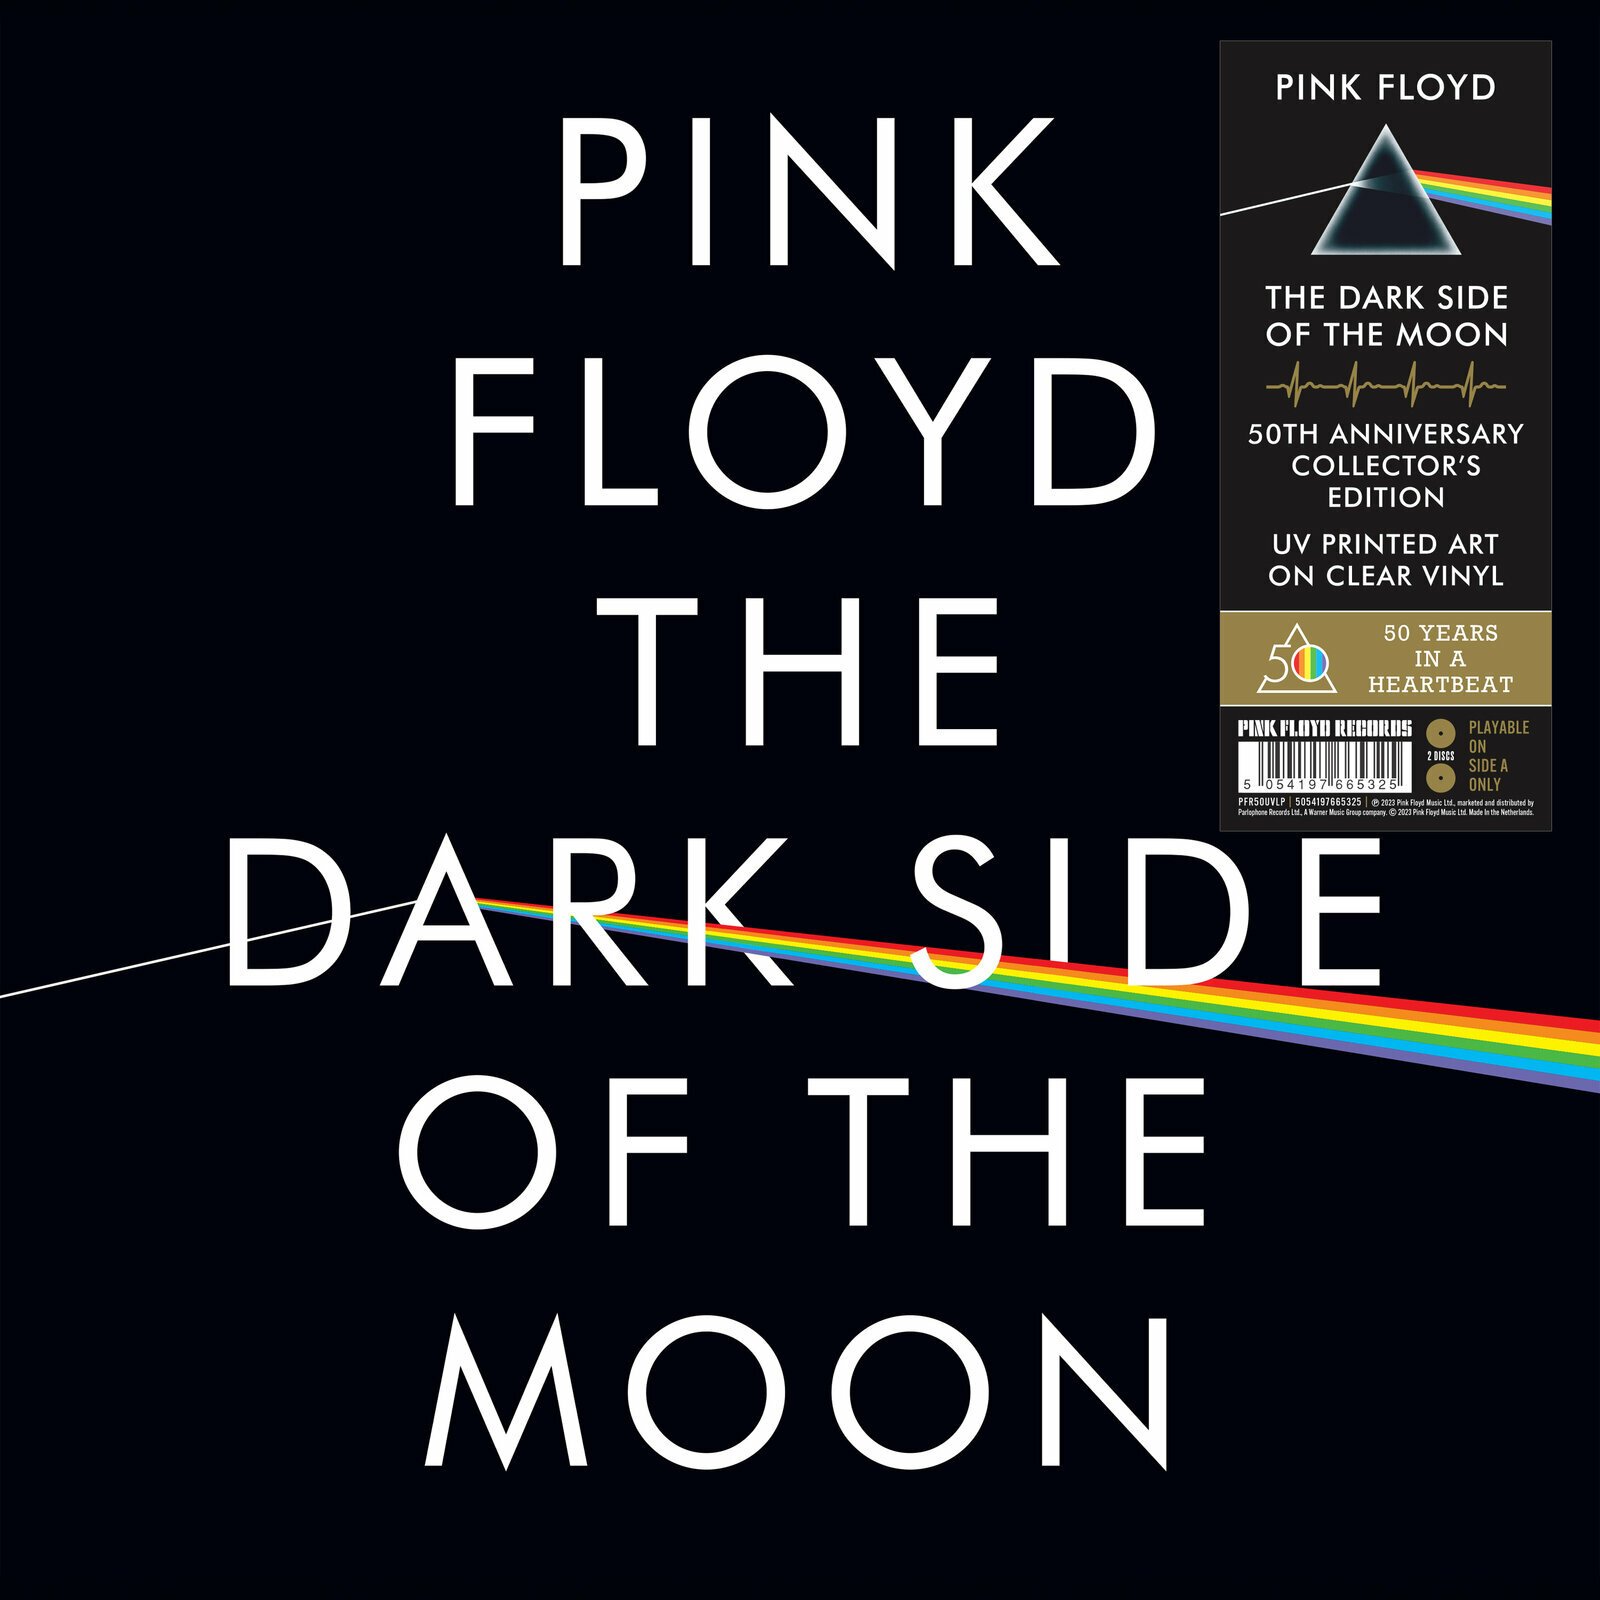 Hanglemez Pink Floyd - The Dark Side Of The Moon (50th Anniversary Edition) (Limited Edition) (Picture Disc) (2 LP)